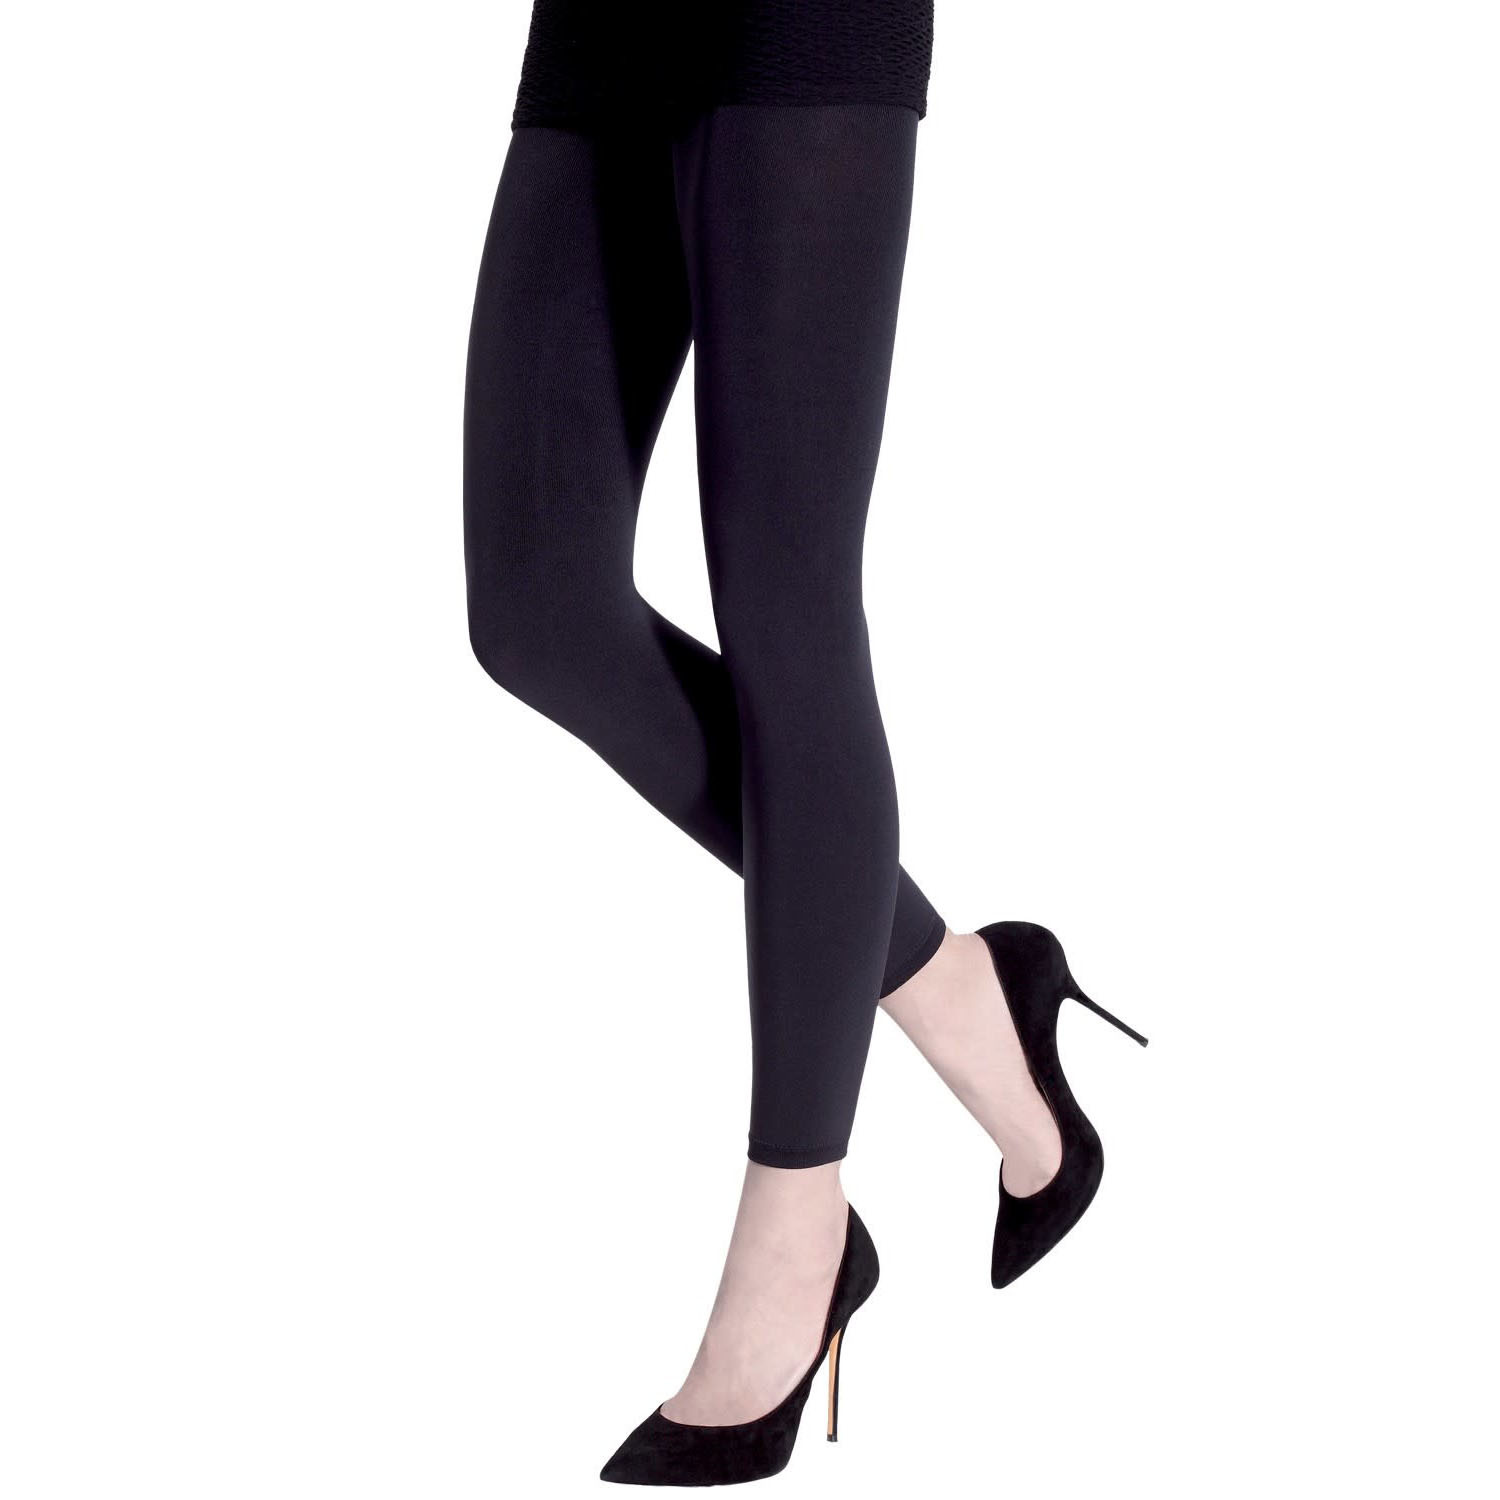 Buy Black 200 Denier Supersoft Opaque Tights XL, Tights